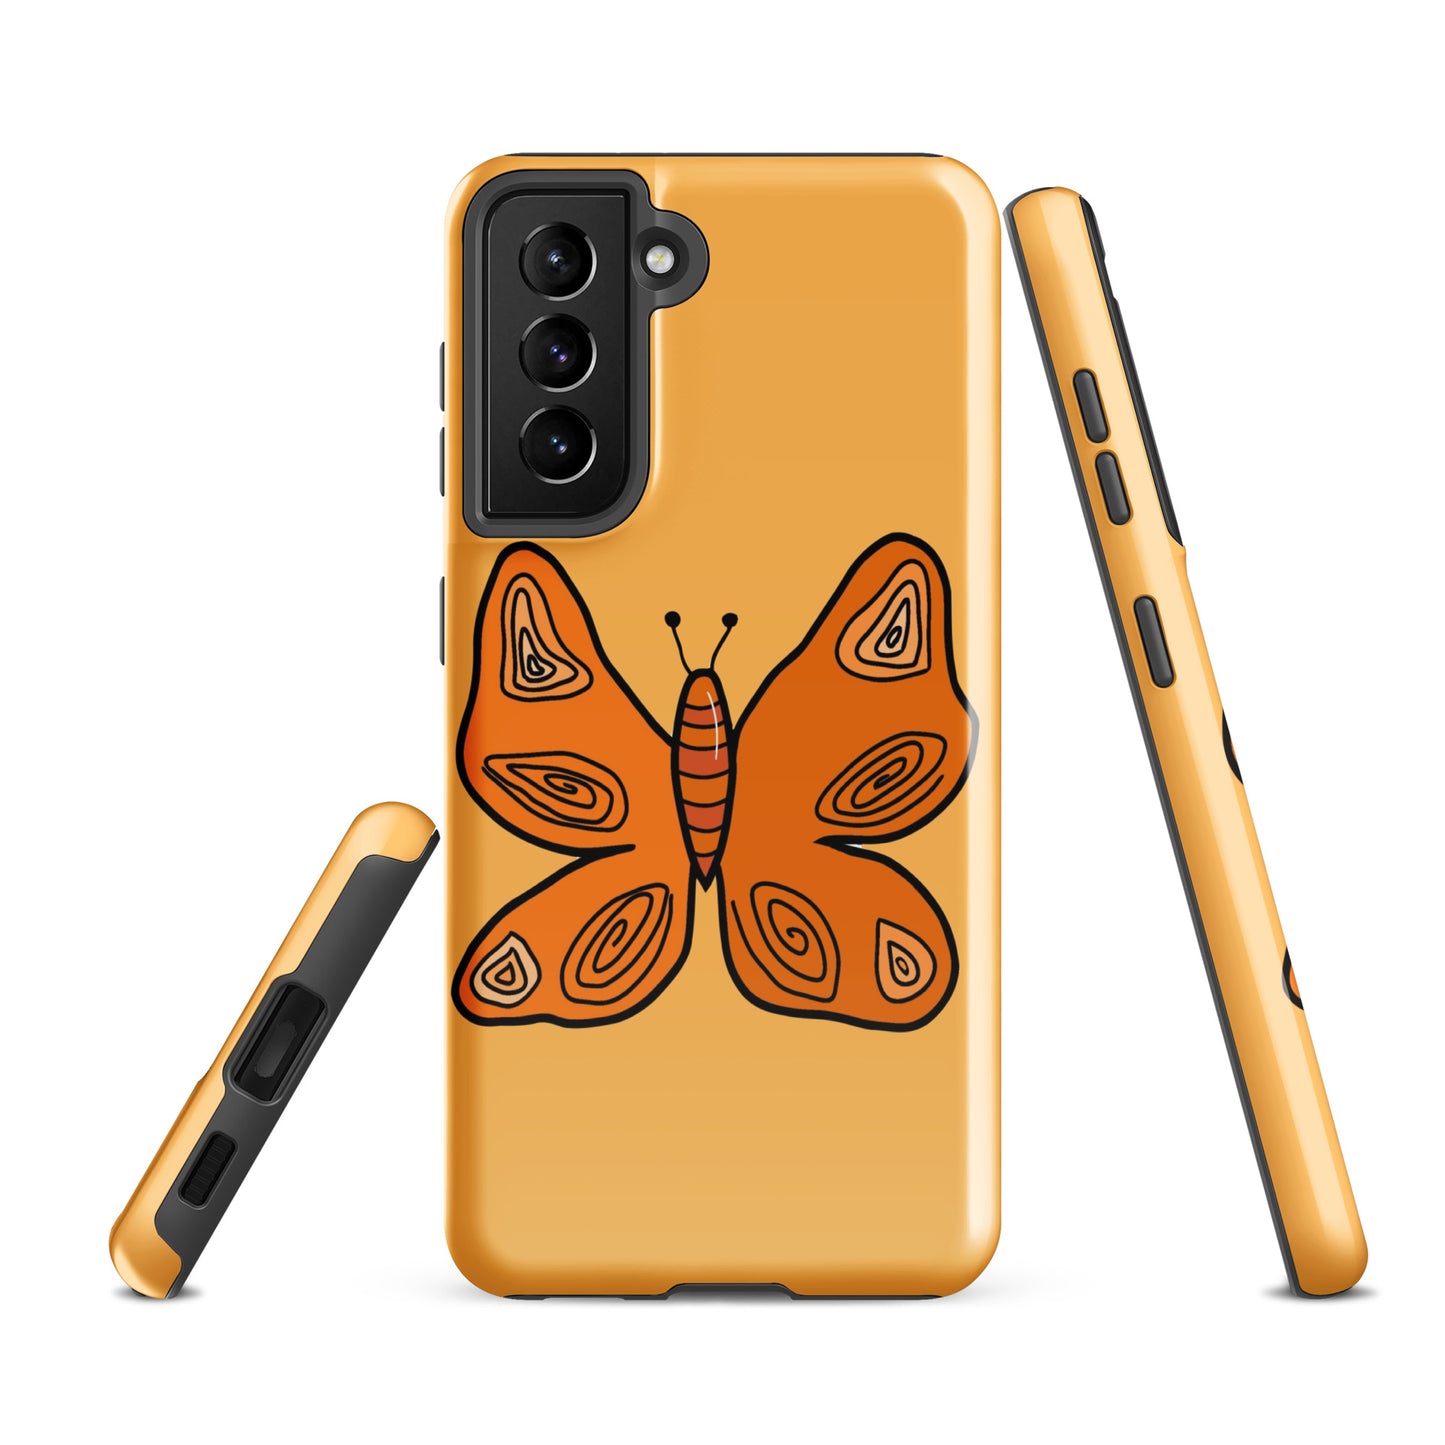 An Orange Butterfly Case for the Samsung Galaxy S21 FE